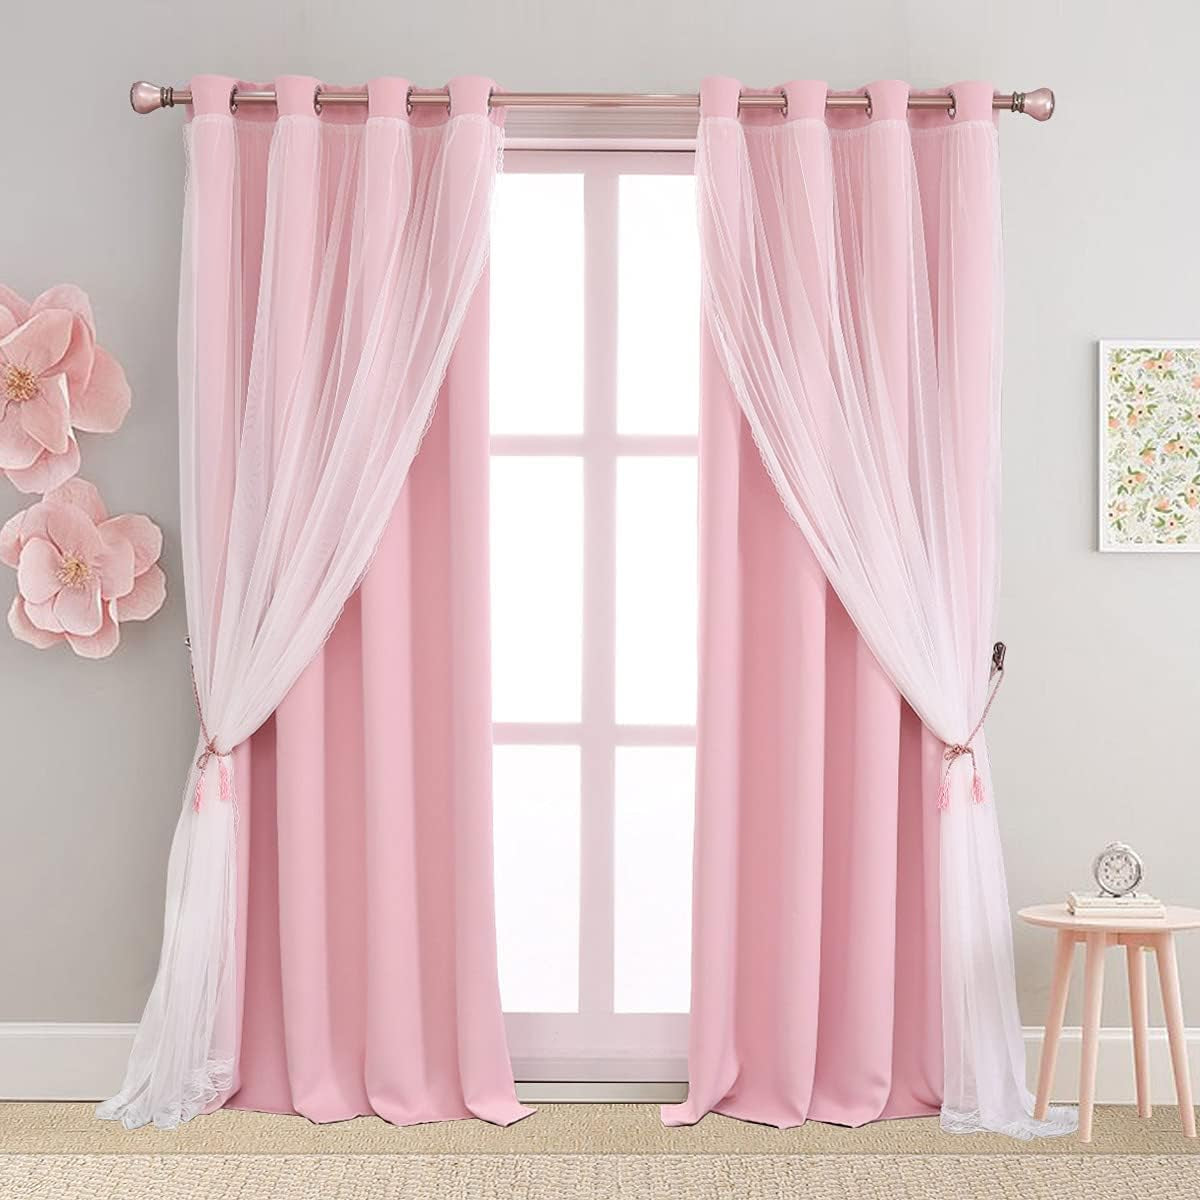 Pink Blackout Curtains 84 Inch Length - Double Layers Princess Girls Curtains & Draperies Panels for Kids Bedroom Living Room Nursery Pink Lace Hem Room Darkening Curtains, 2 Pcs  SOFJAGETQ Pink 52 X 90 